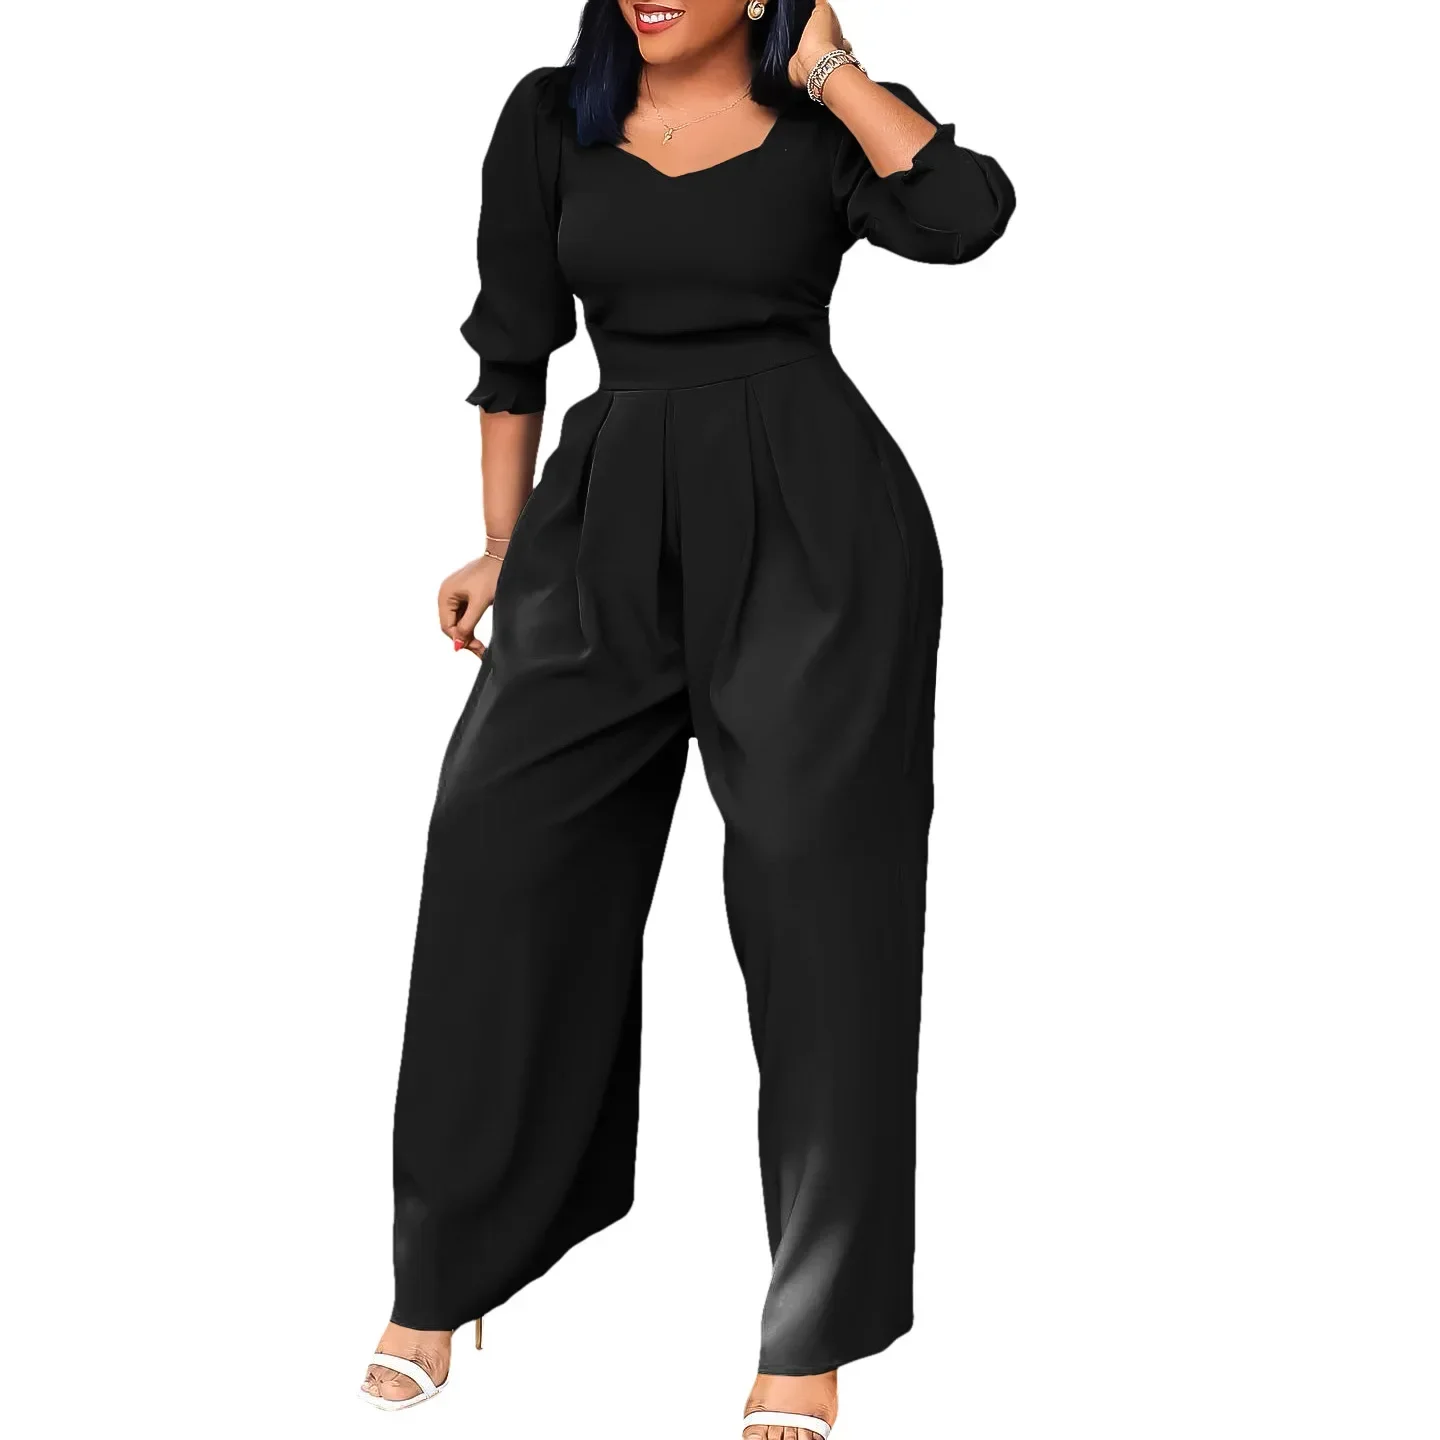 African Loose Jumpsuit Women Fashion Streetwear Jumpsuits Ladies Outfits Mamelucos Mujer Wide Leg Classy Party One Piece Romper einyoo zevity women s evening party sexy ruffle hollow out elegant dresses ladies off shoulder bodycon belt jumpsuit traf y2k